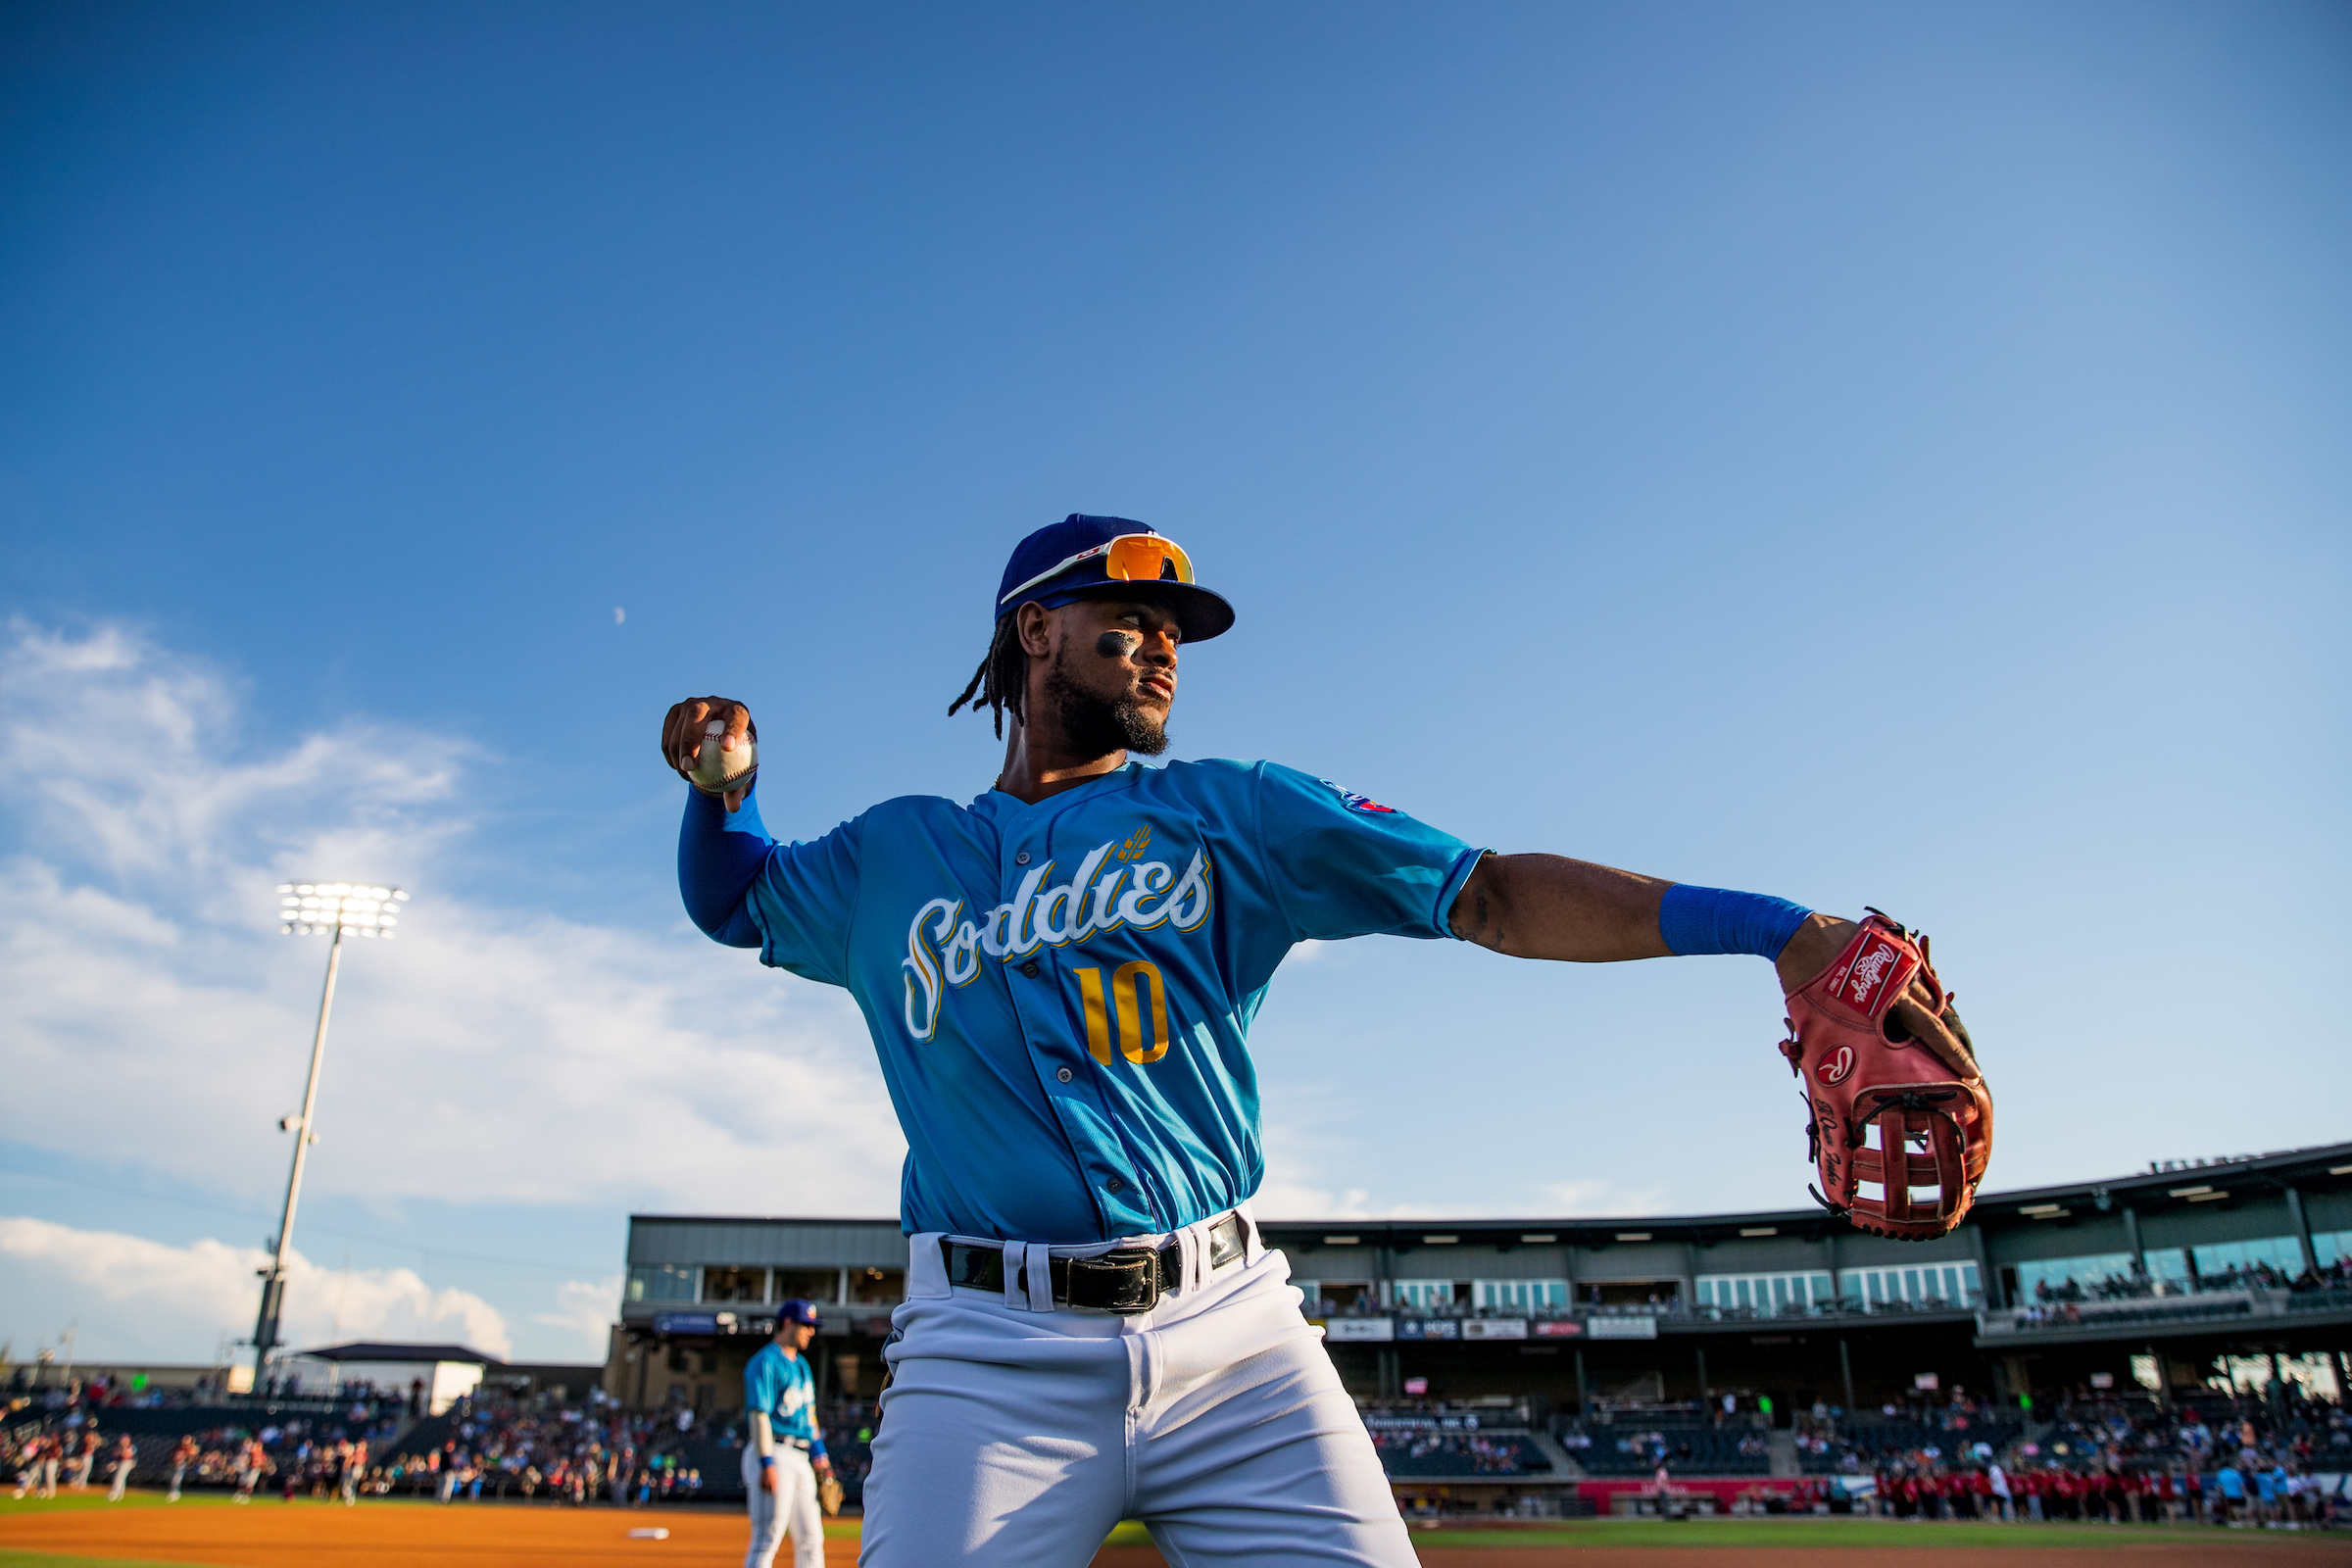 Minor League Baseball Players Are Unionized for the First Time in History